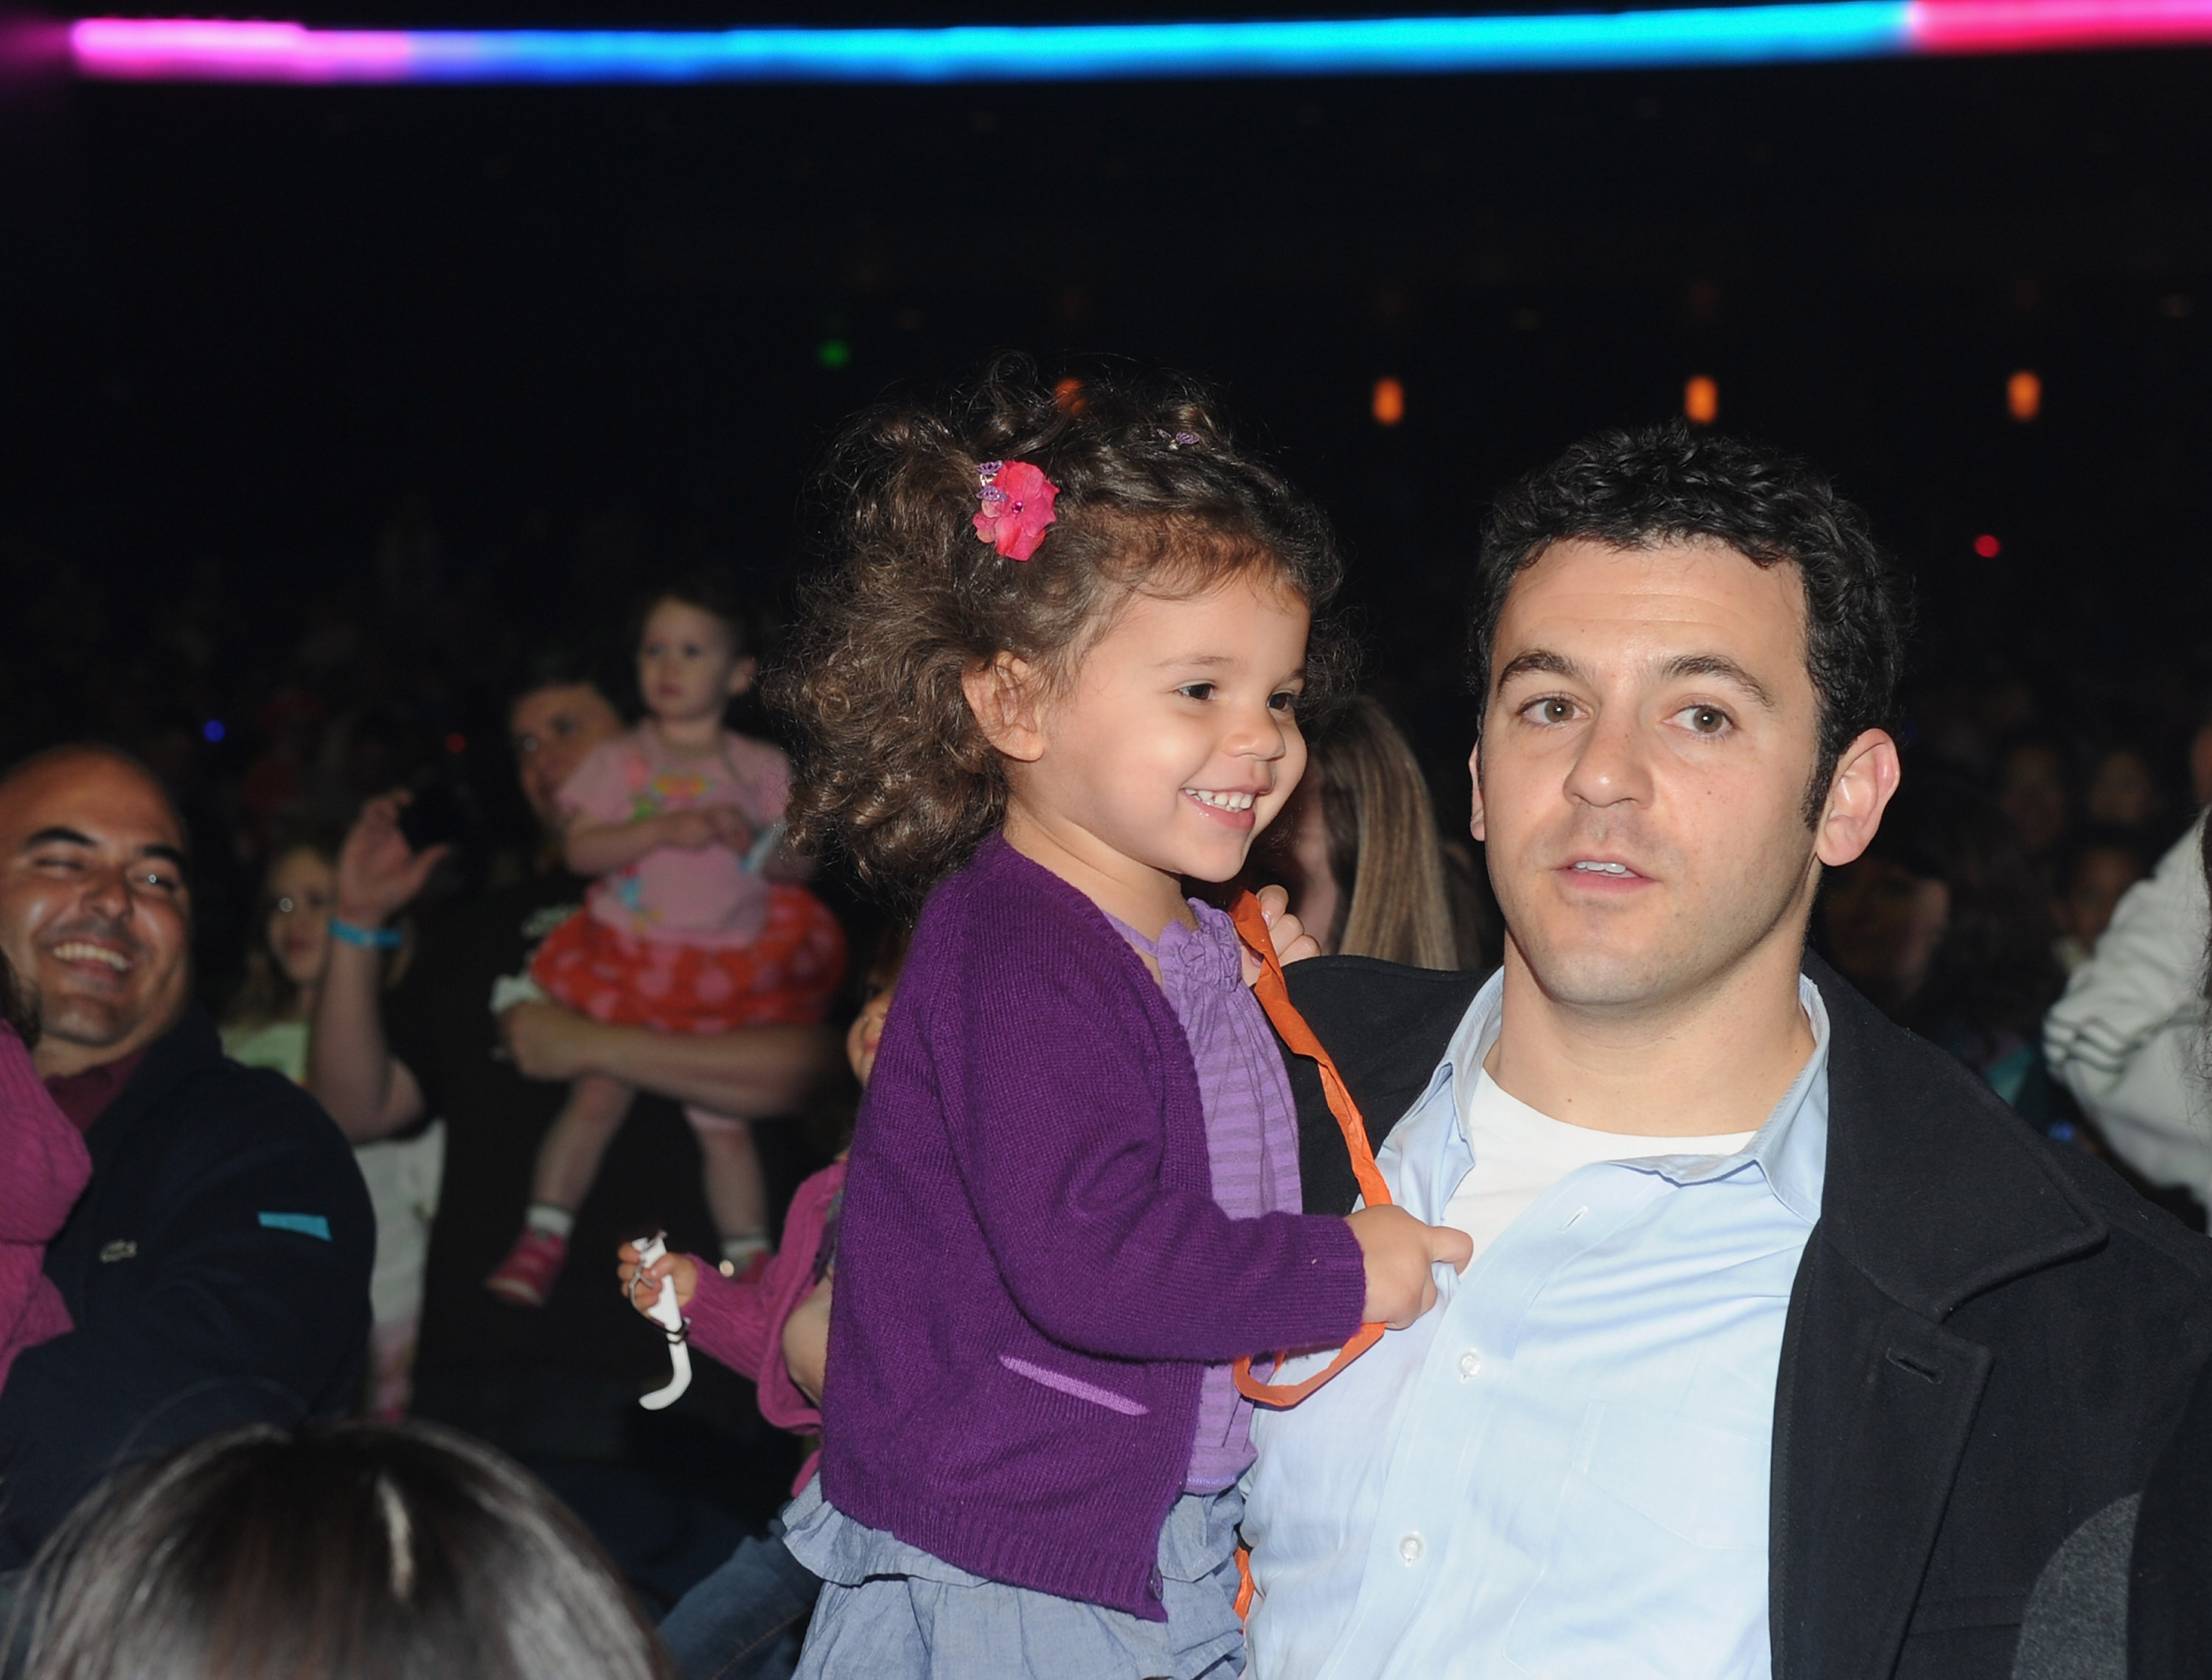 Actor Fred Savage (R) and daughter Lily Savage at Yo Gabba Gabba! Live! There's A Party In My City! at Nokia L.A. Live on November 26, 2010 in Los Angeles, California. | Source: Getty Images